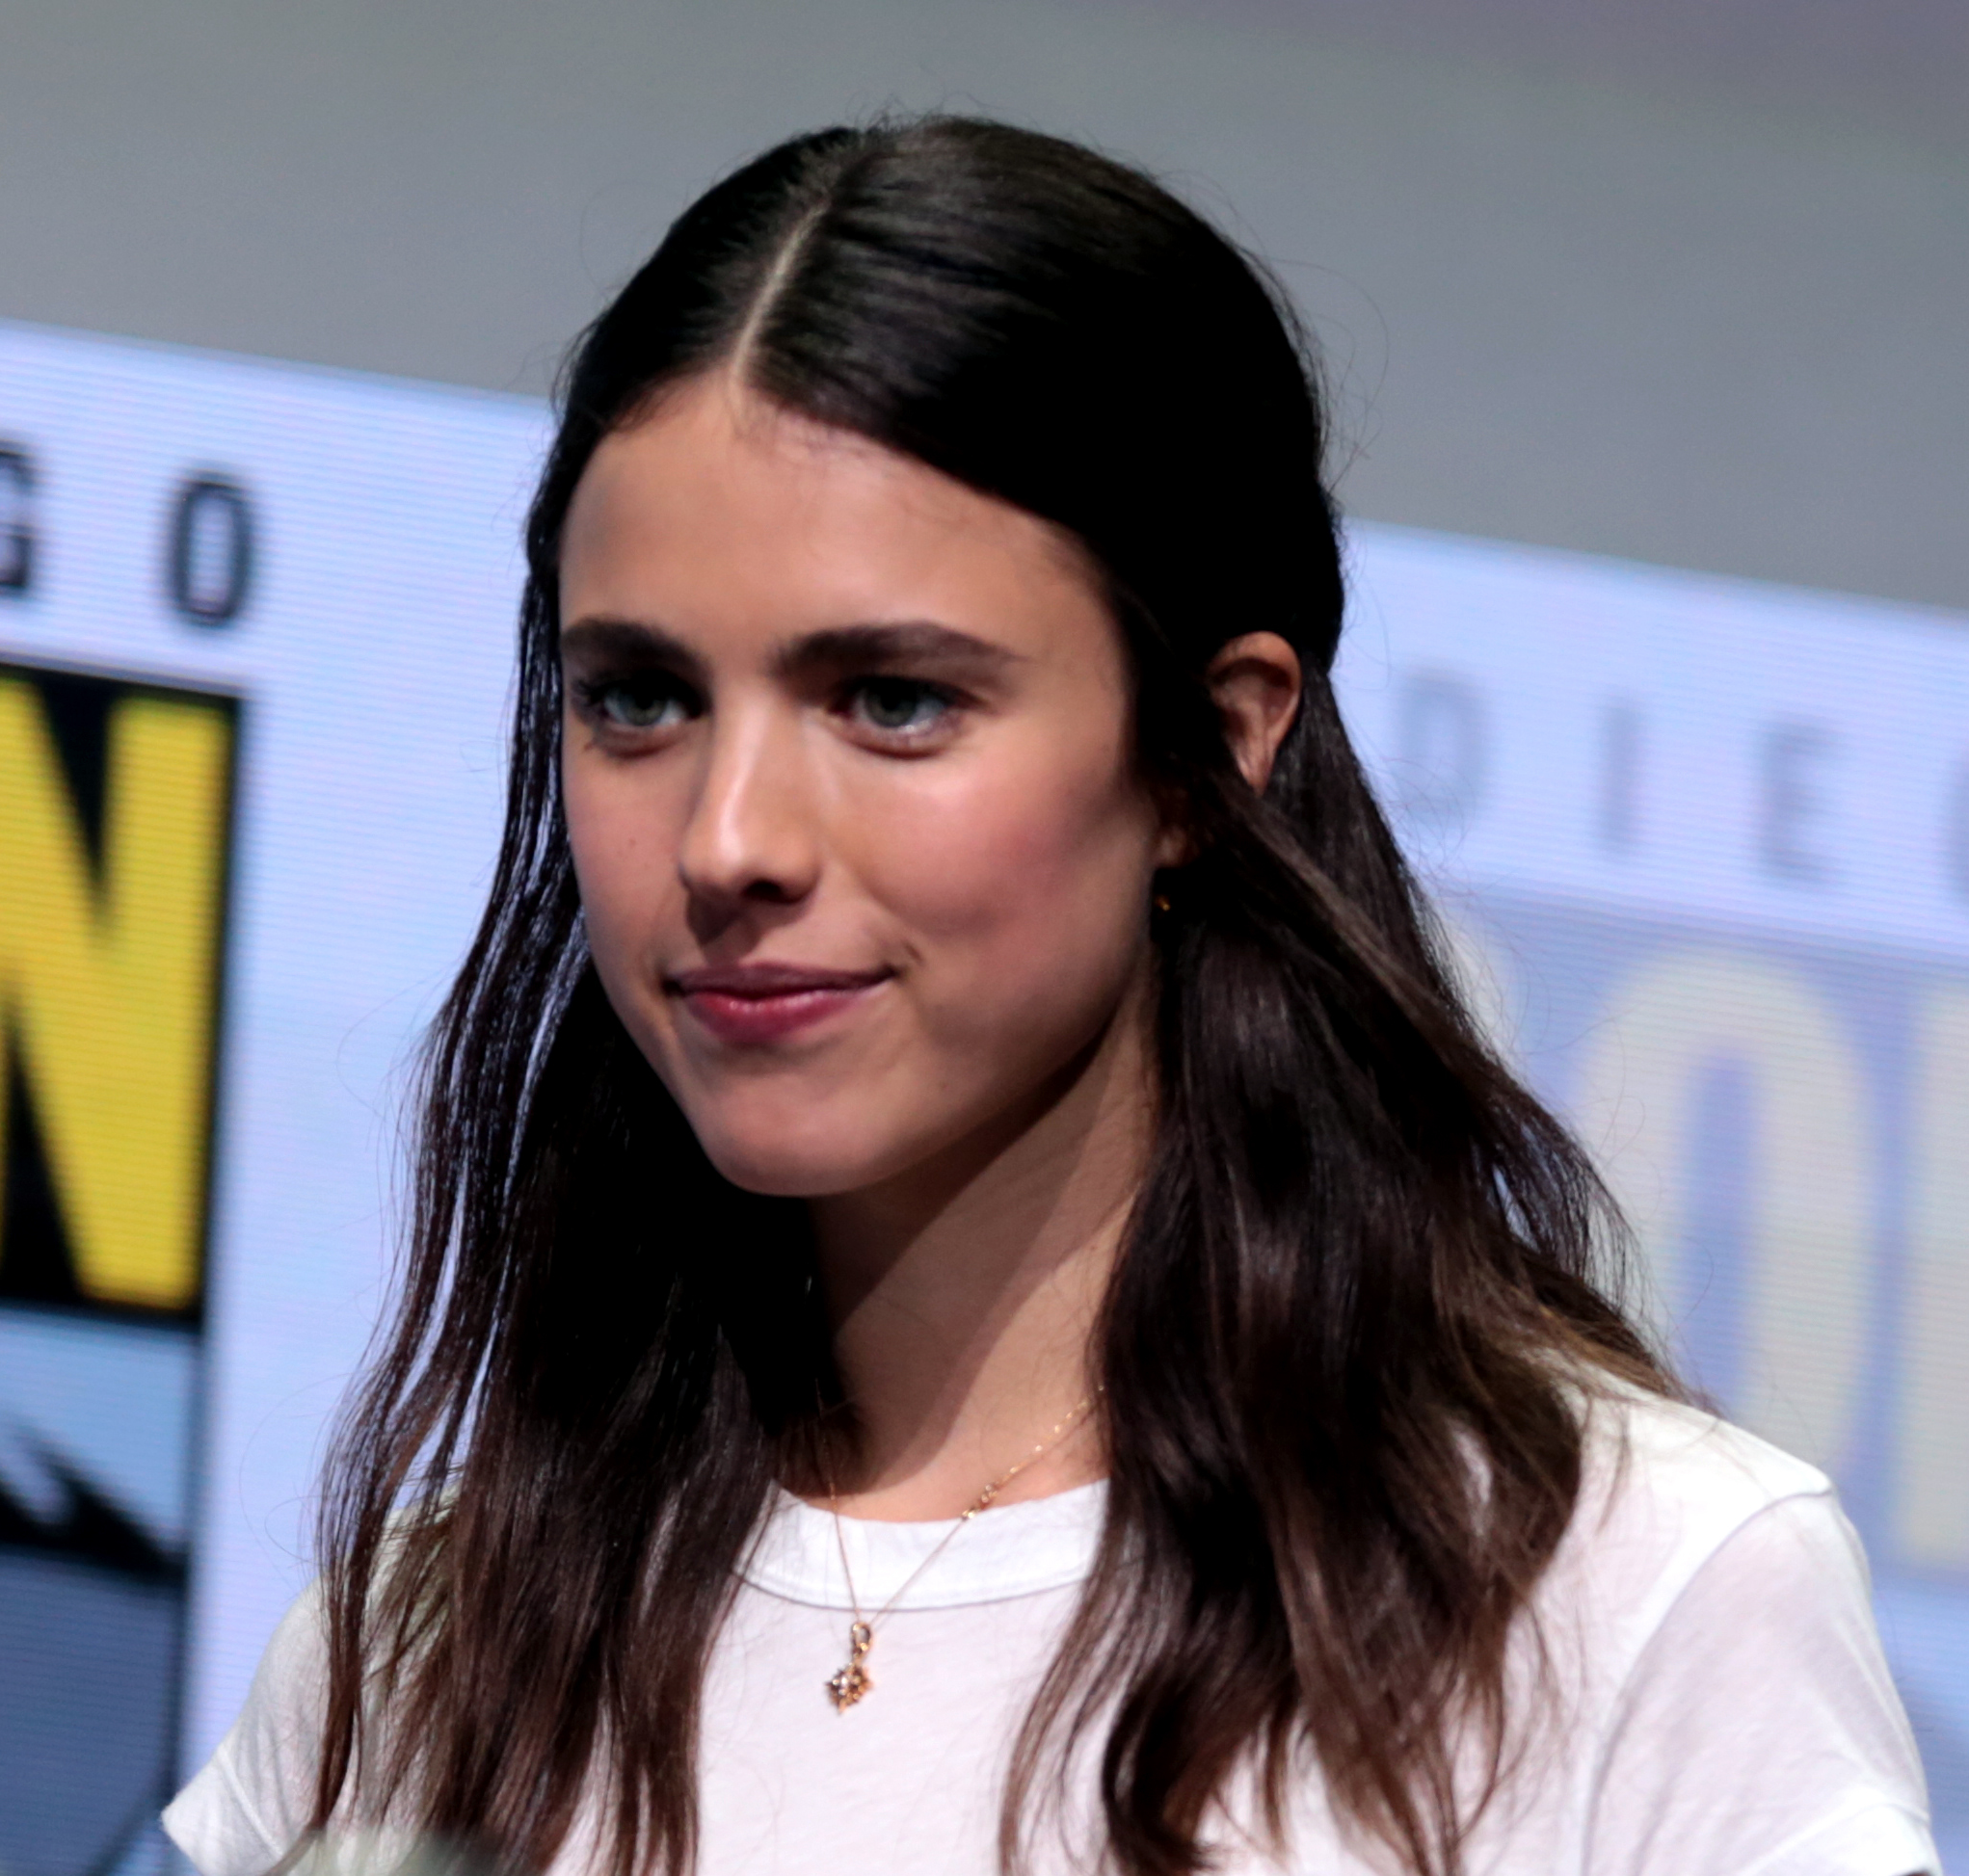 Scott Cooper to direct Margaret Qualley in 'A Head Full Of Ghosts'